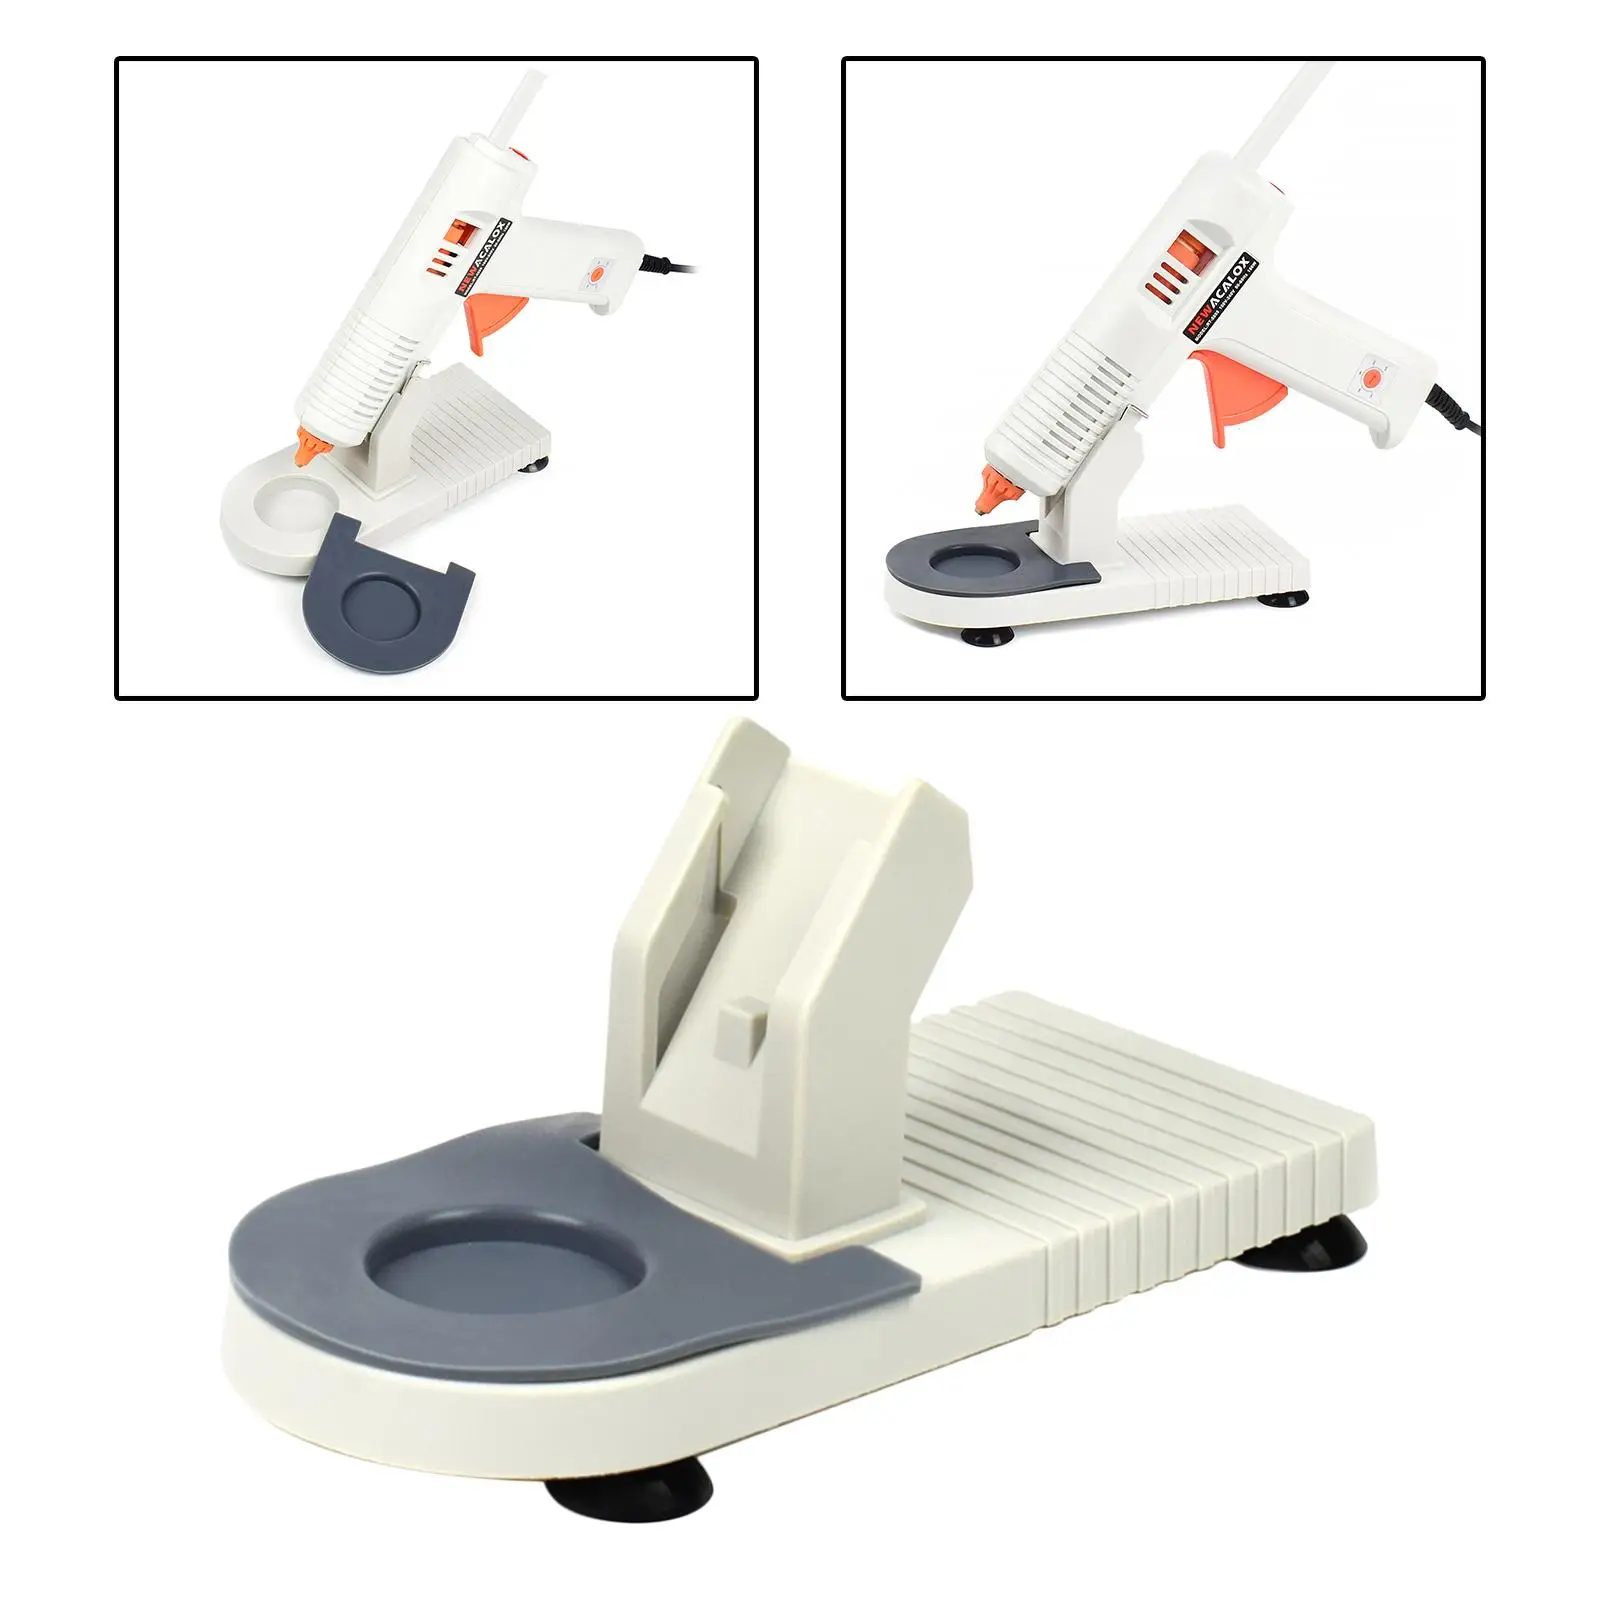 1x Base Storage  Hot Glue Bracket for Household Electricians